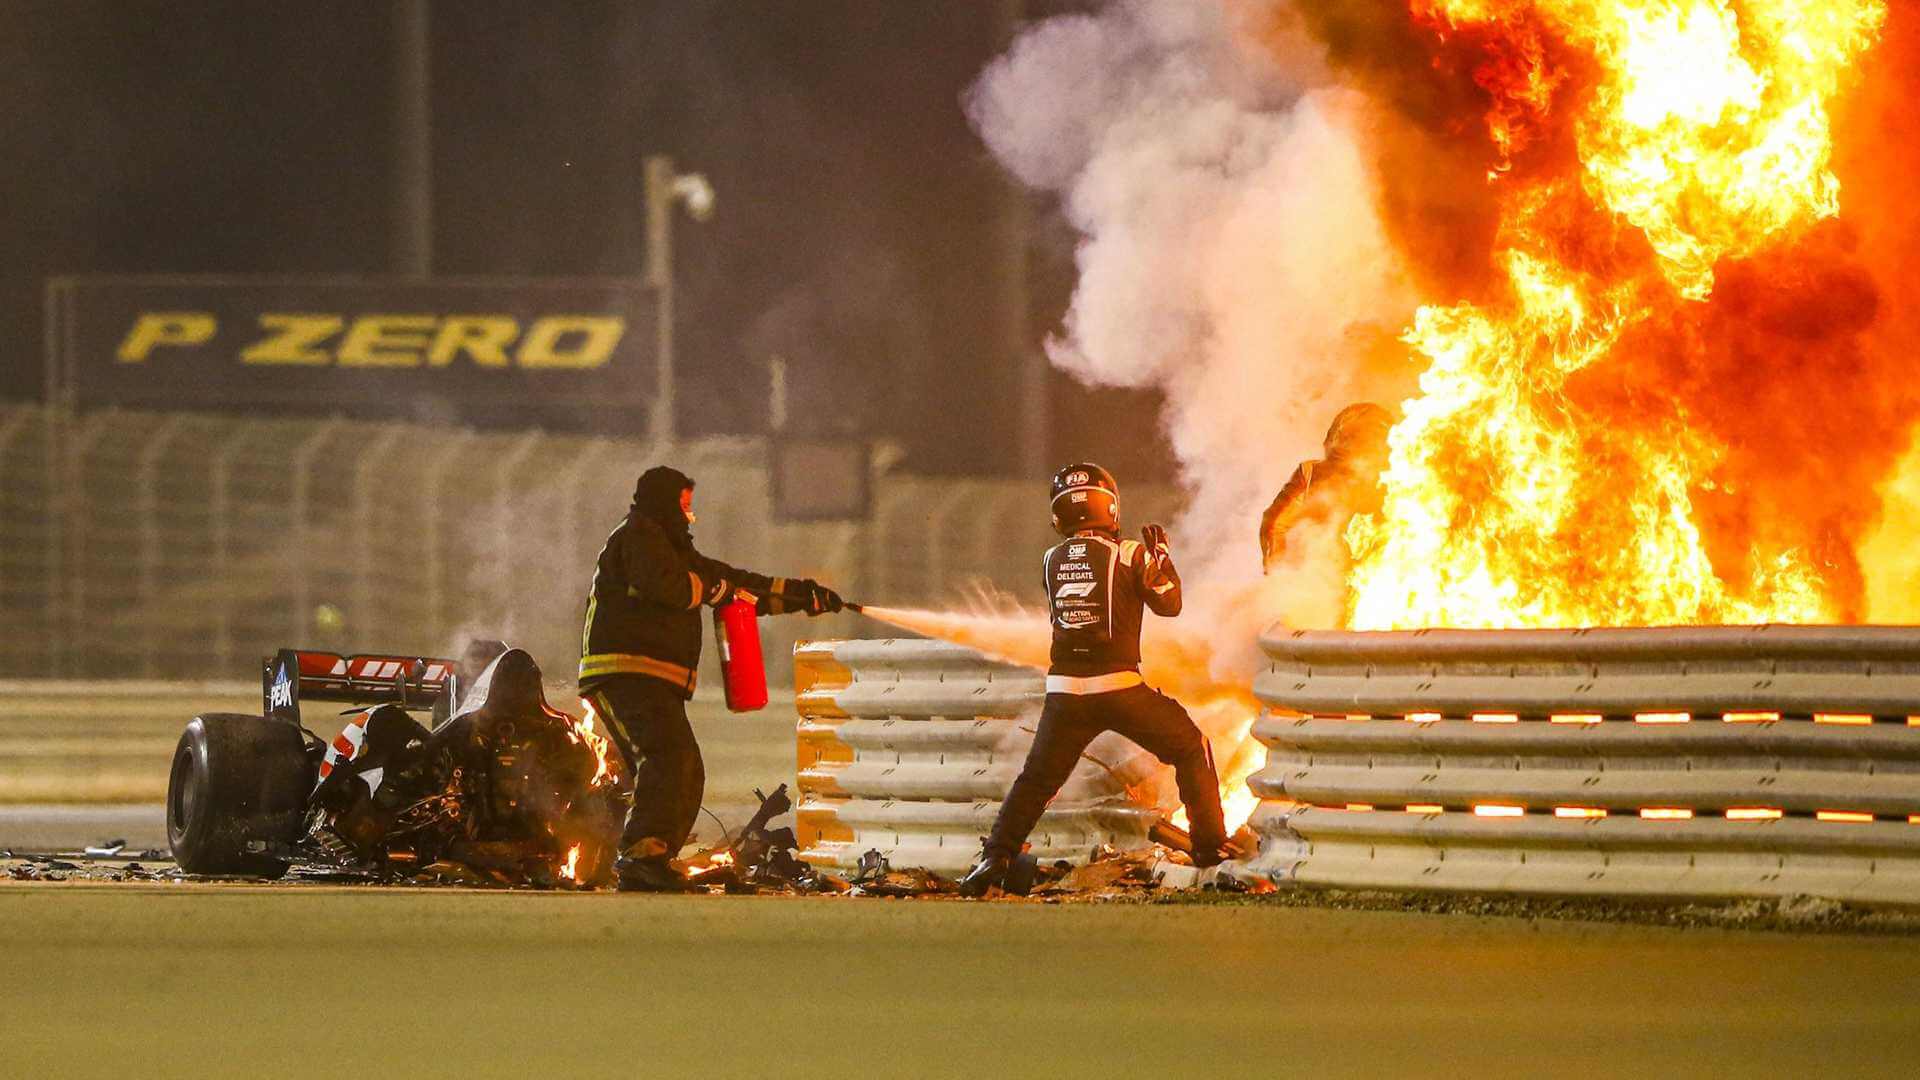 romain grosjean getting out of his car that is on fire at bahrain gp 2020